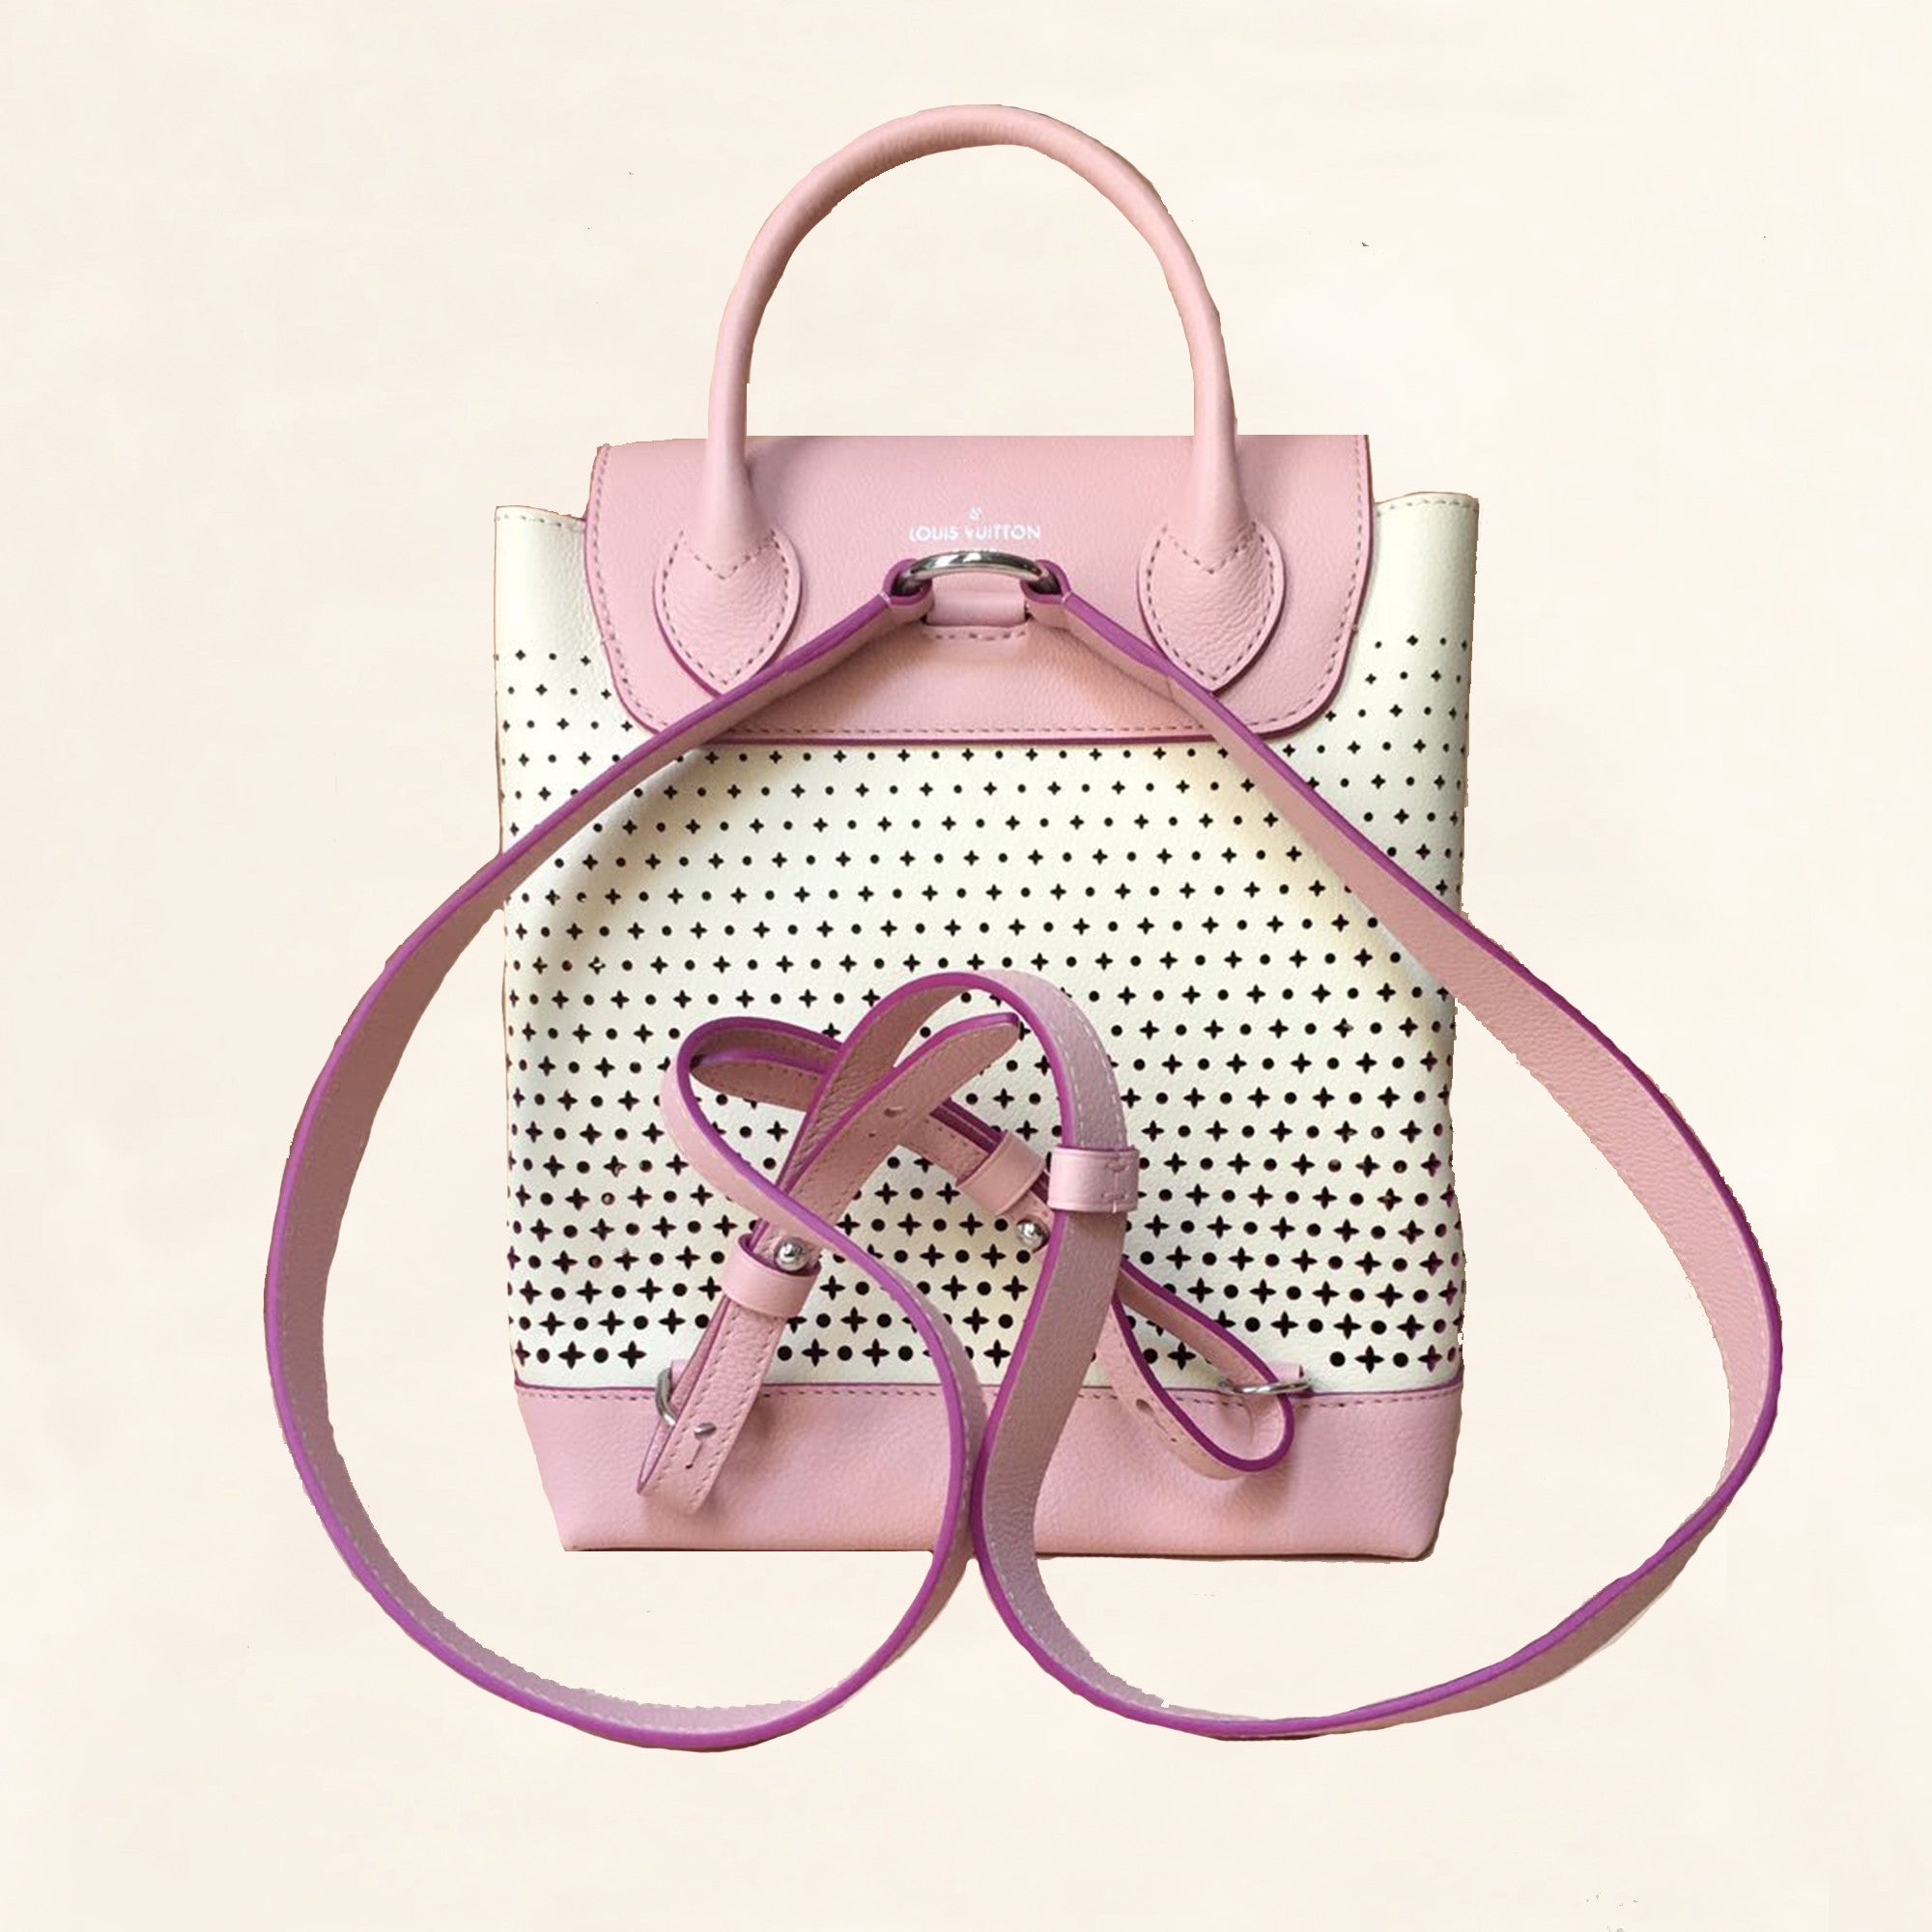 Vuitton | Perforated Pink Calfskin Lockme Backpack | TC